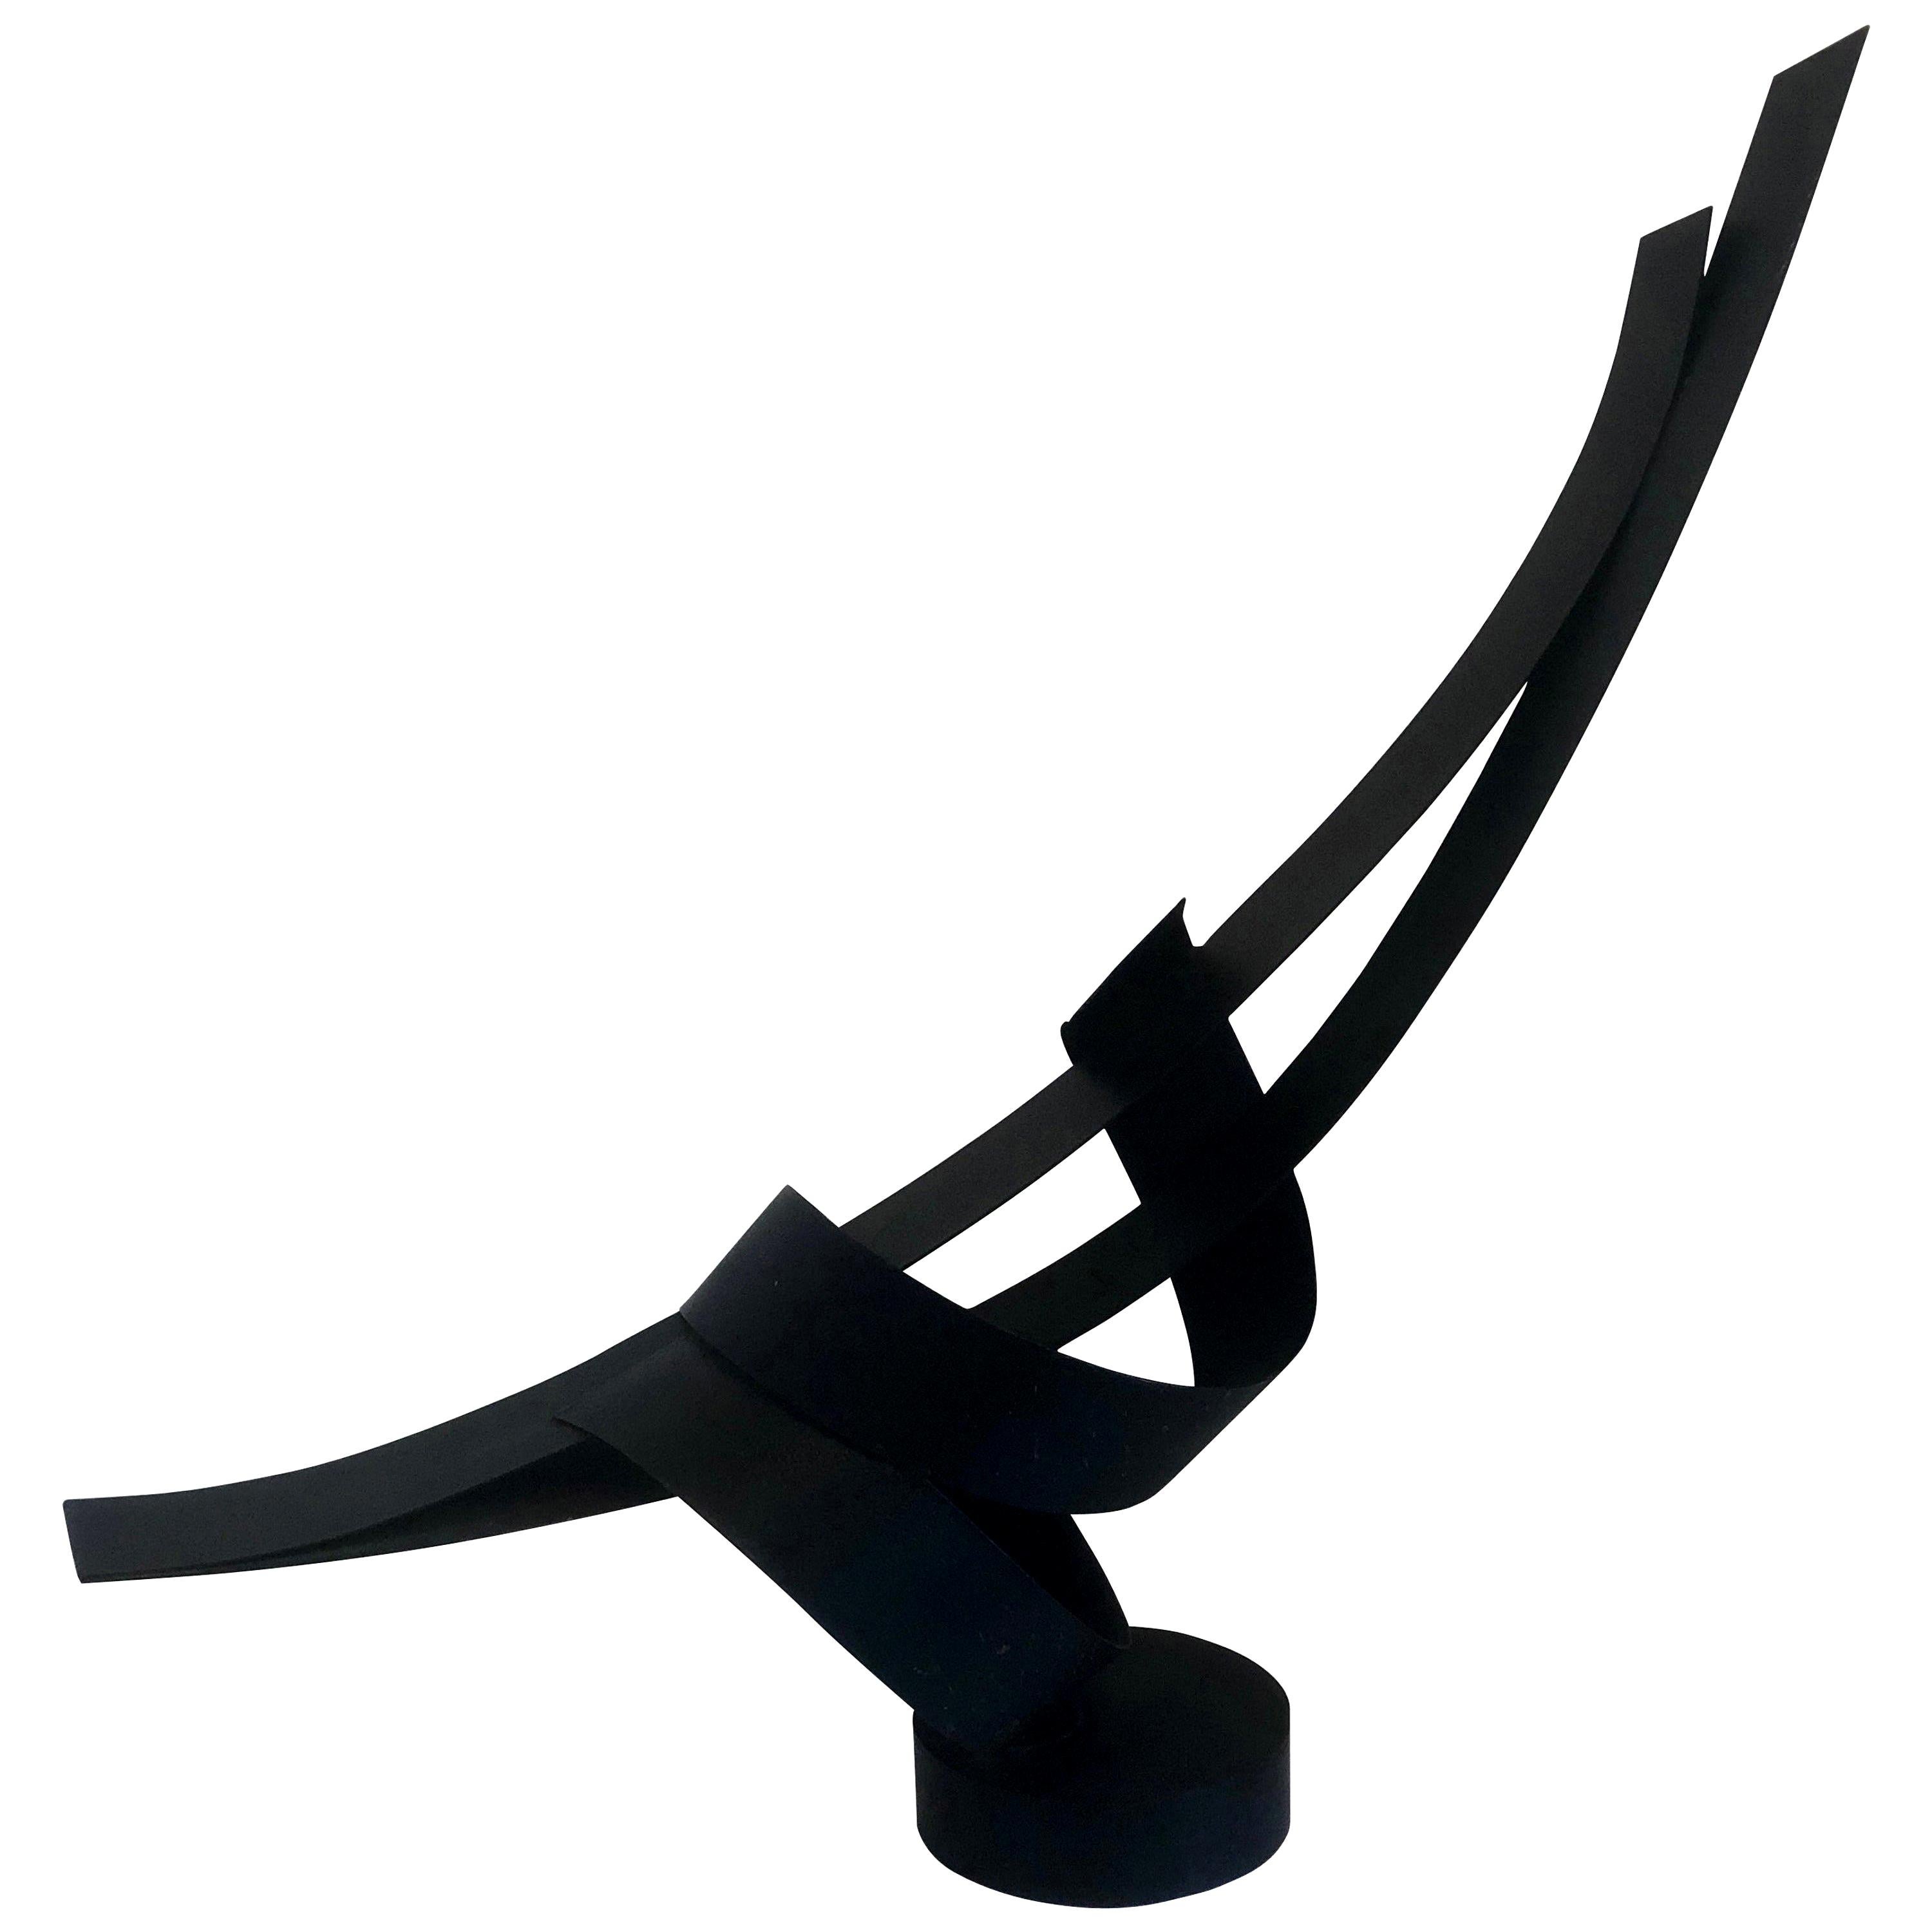 20th Century Abstract Sculpture in Black Textured Iron Metal by John Roper